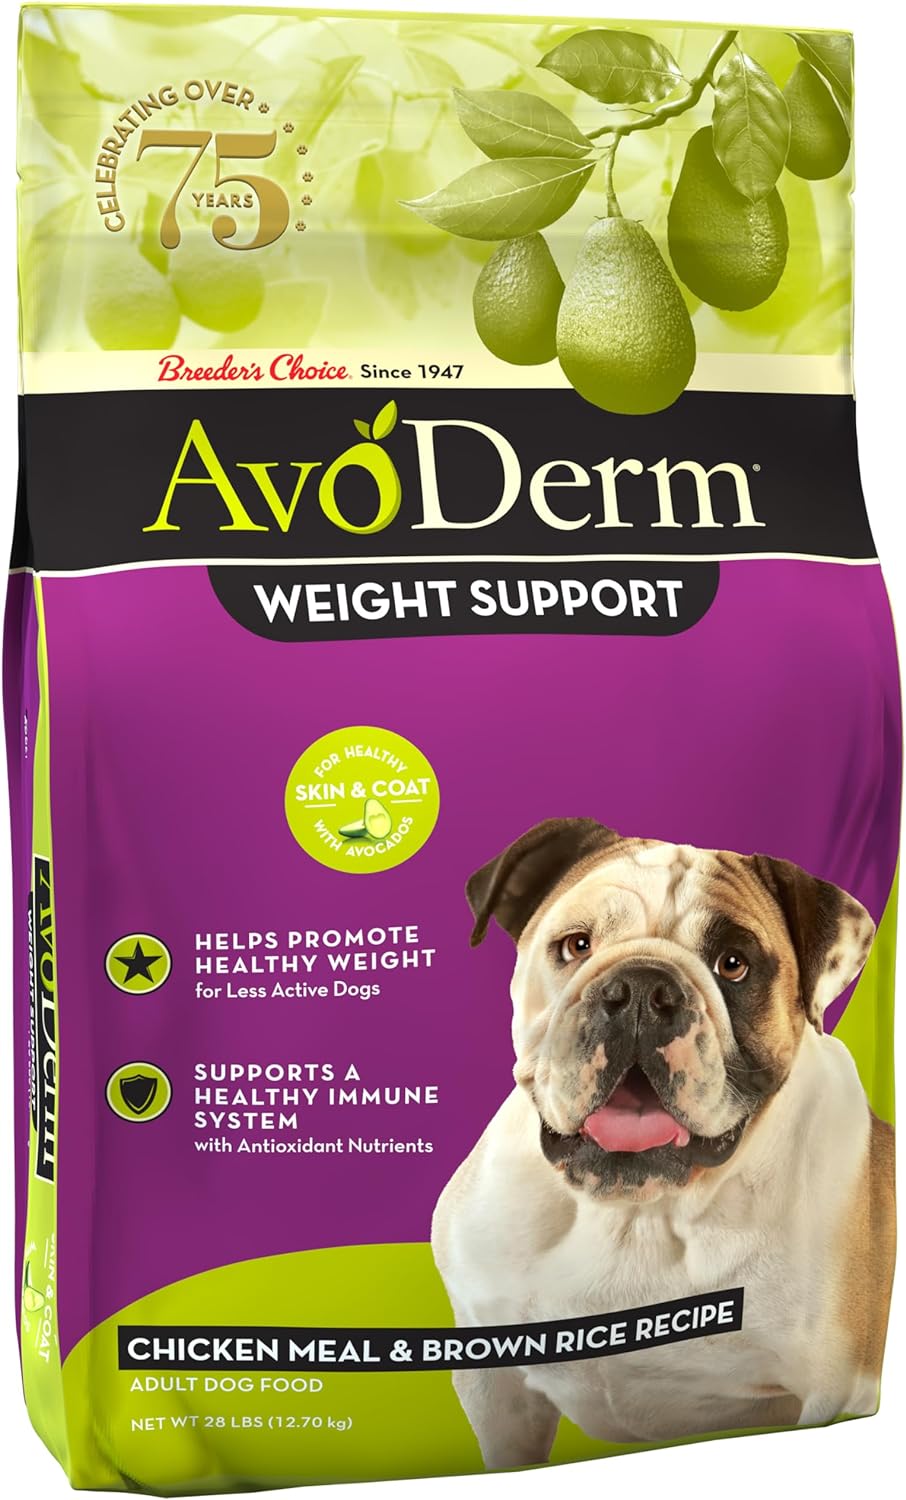 AvoDerm Weight Support Chicken Meal & Brown Rice Recipe Dry Dog Food – Gallery Image 1